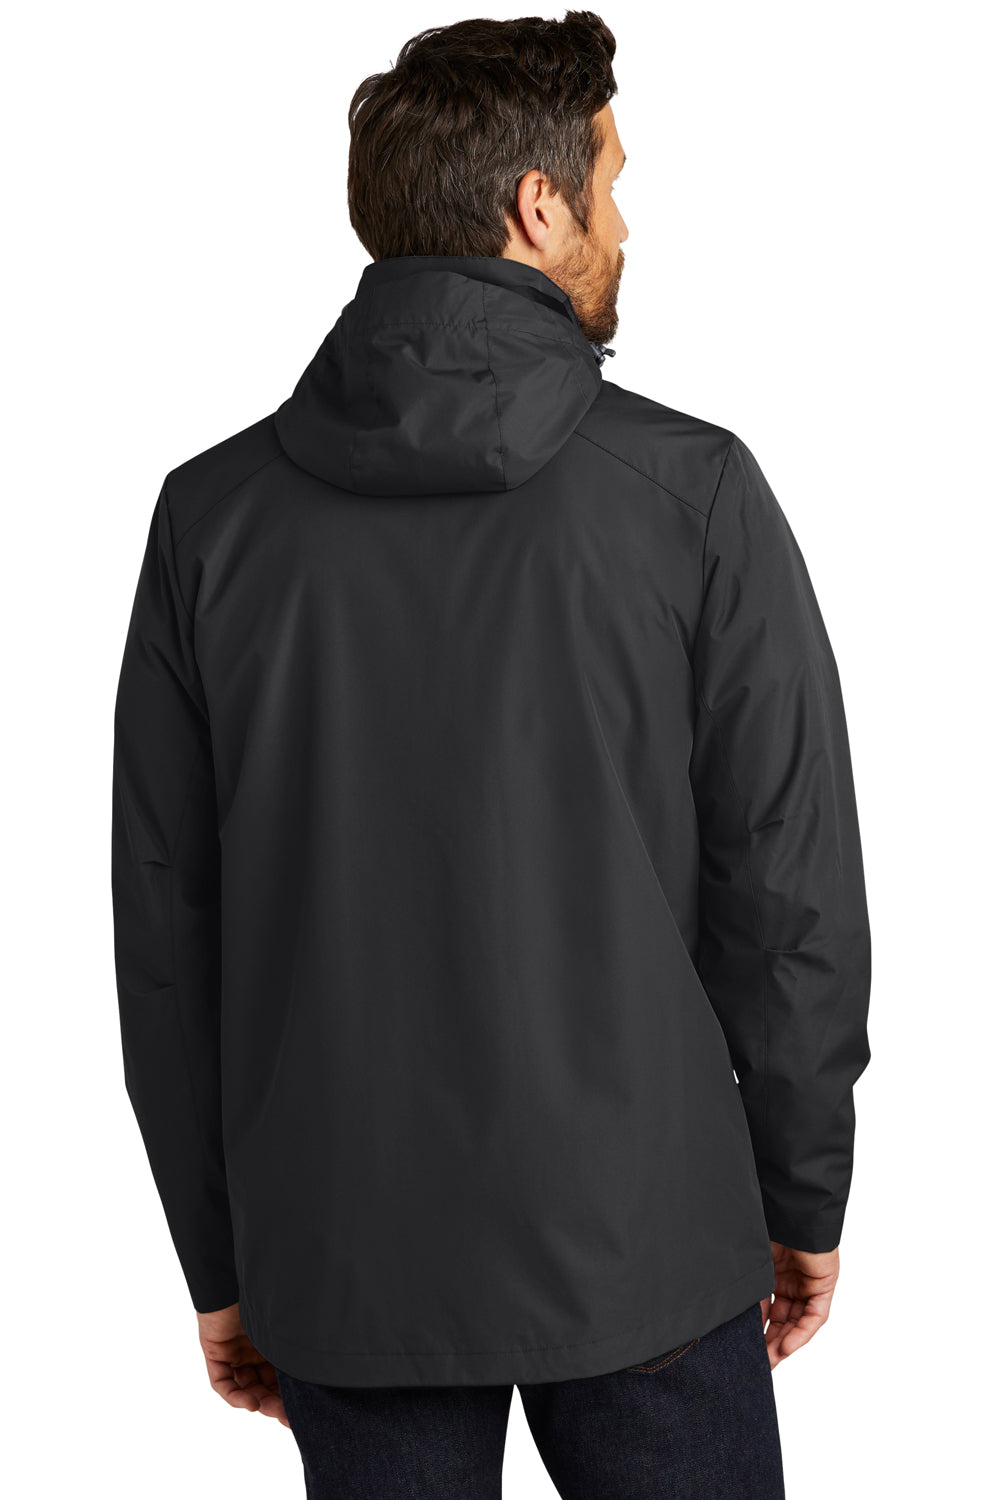 Port Authority J123 Mens All Weather 3 in 1 Full Zip Hooded Jacket Black Back